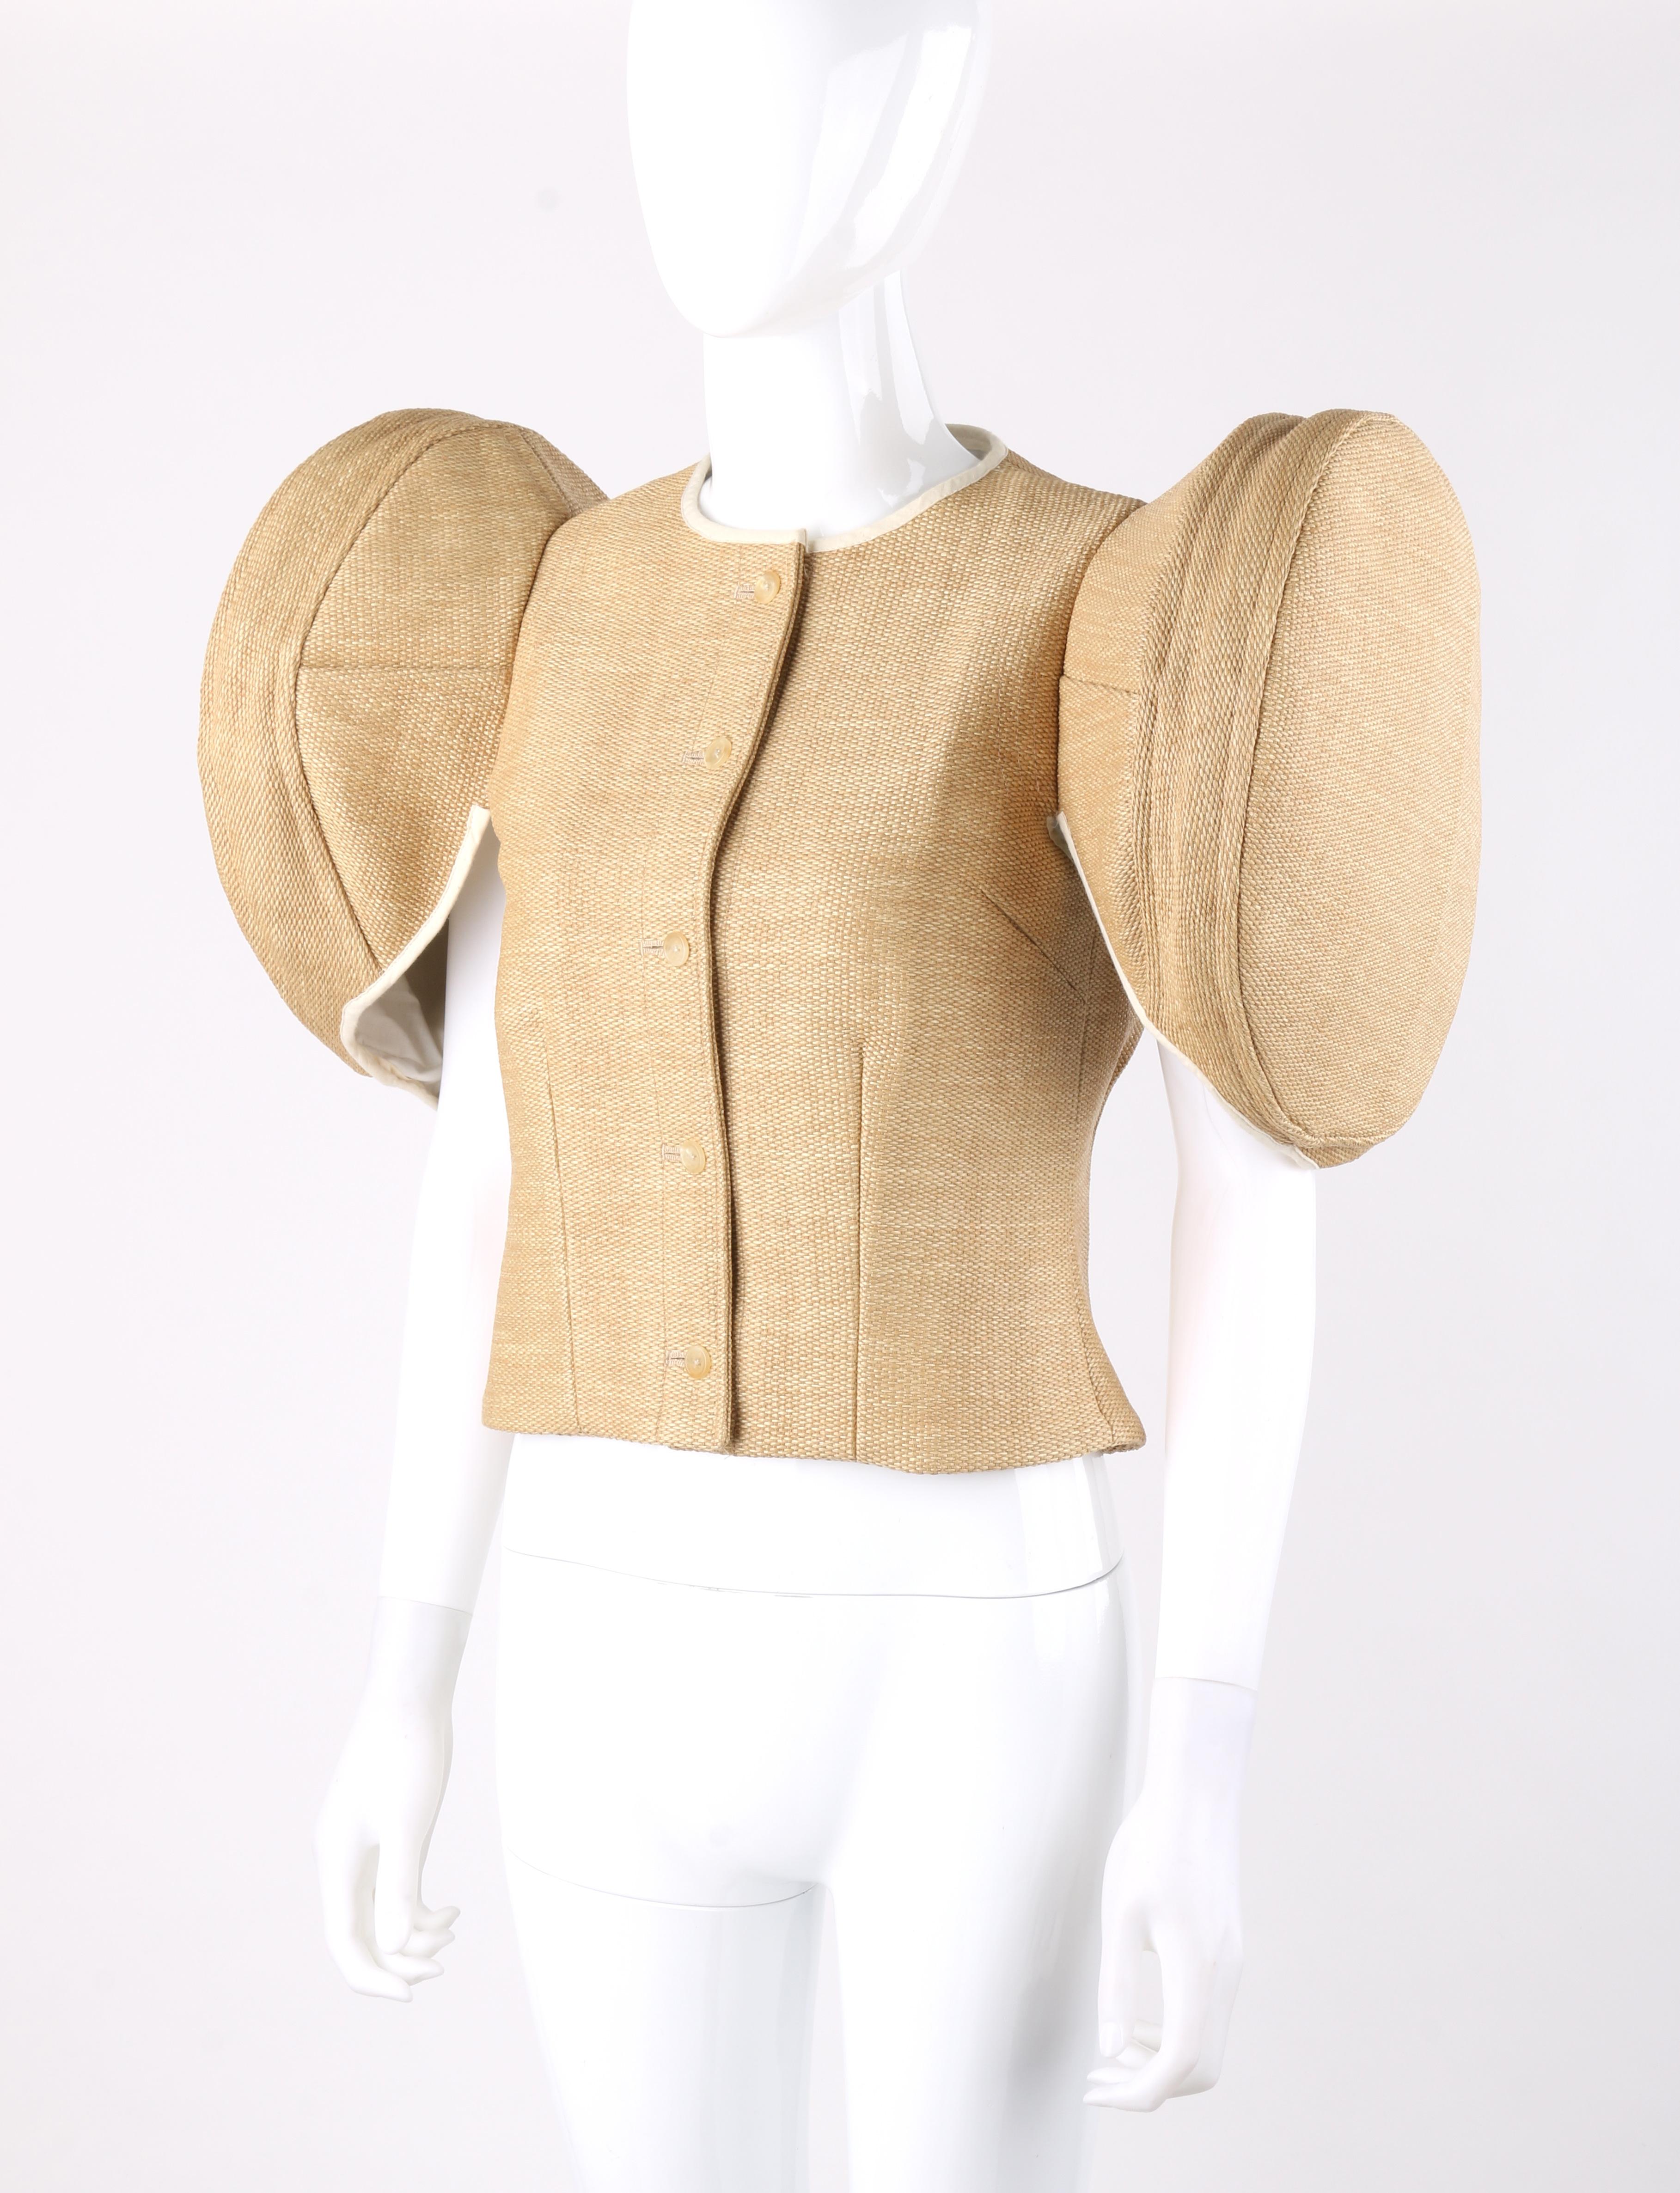 WALTER VAN BEIRENDONCK S/S 2006 Wicker Structured Circle Sleeve Button Front Top For Sale 1